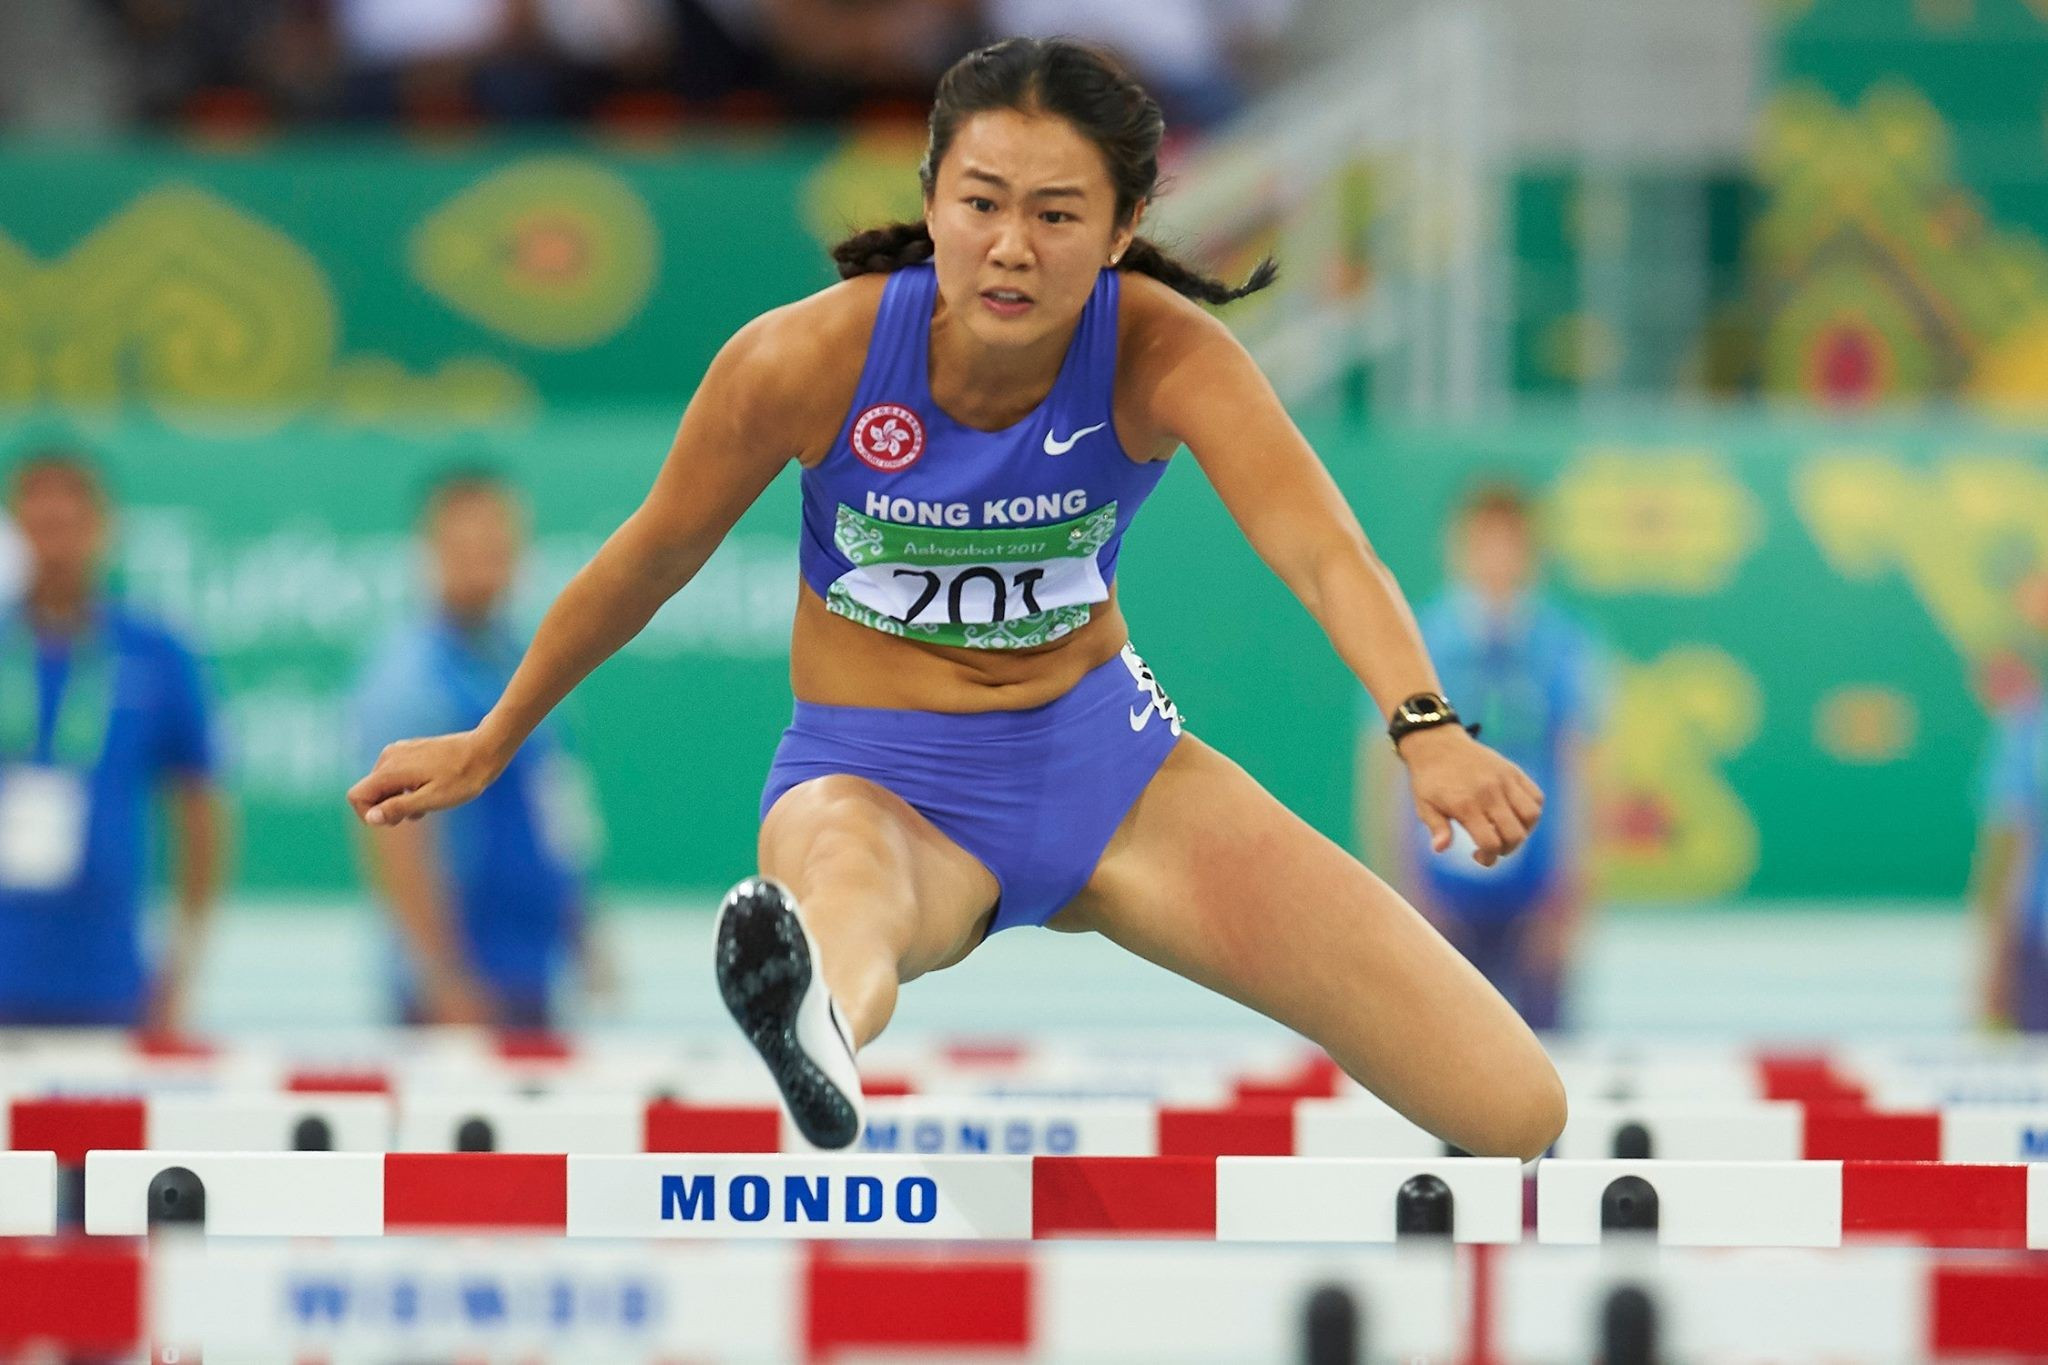 The women’s 60m hurdles event was won by Hong Kong’s Lui Lai Yiu in a personal best time ©Ashgabat 2017/Facebook